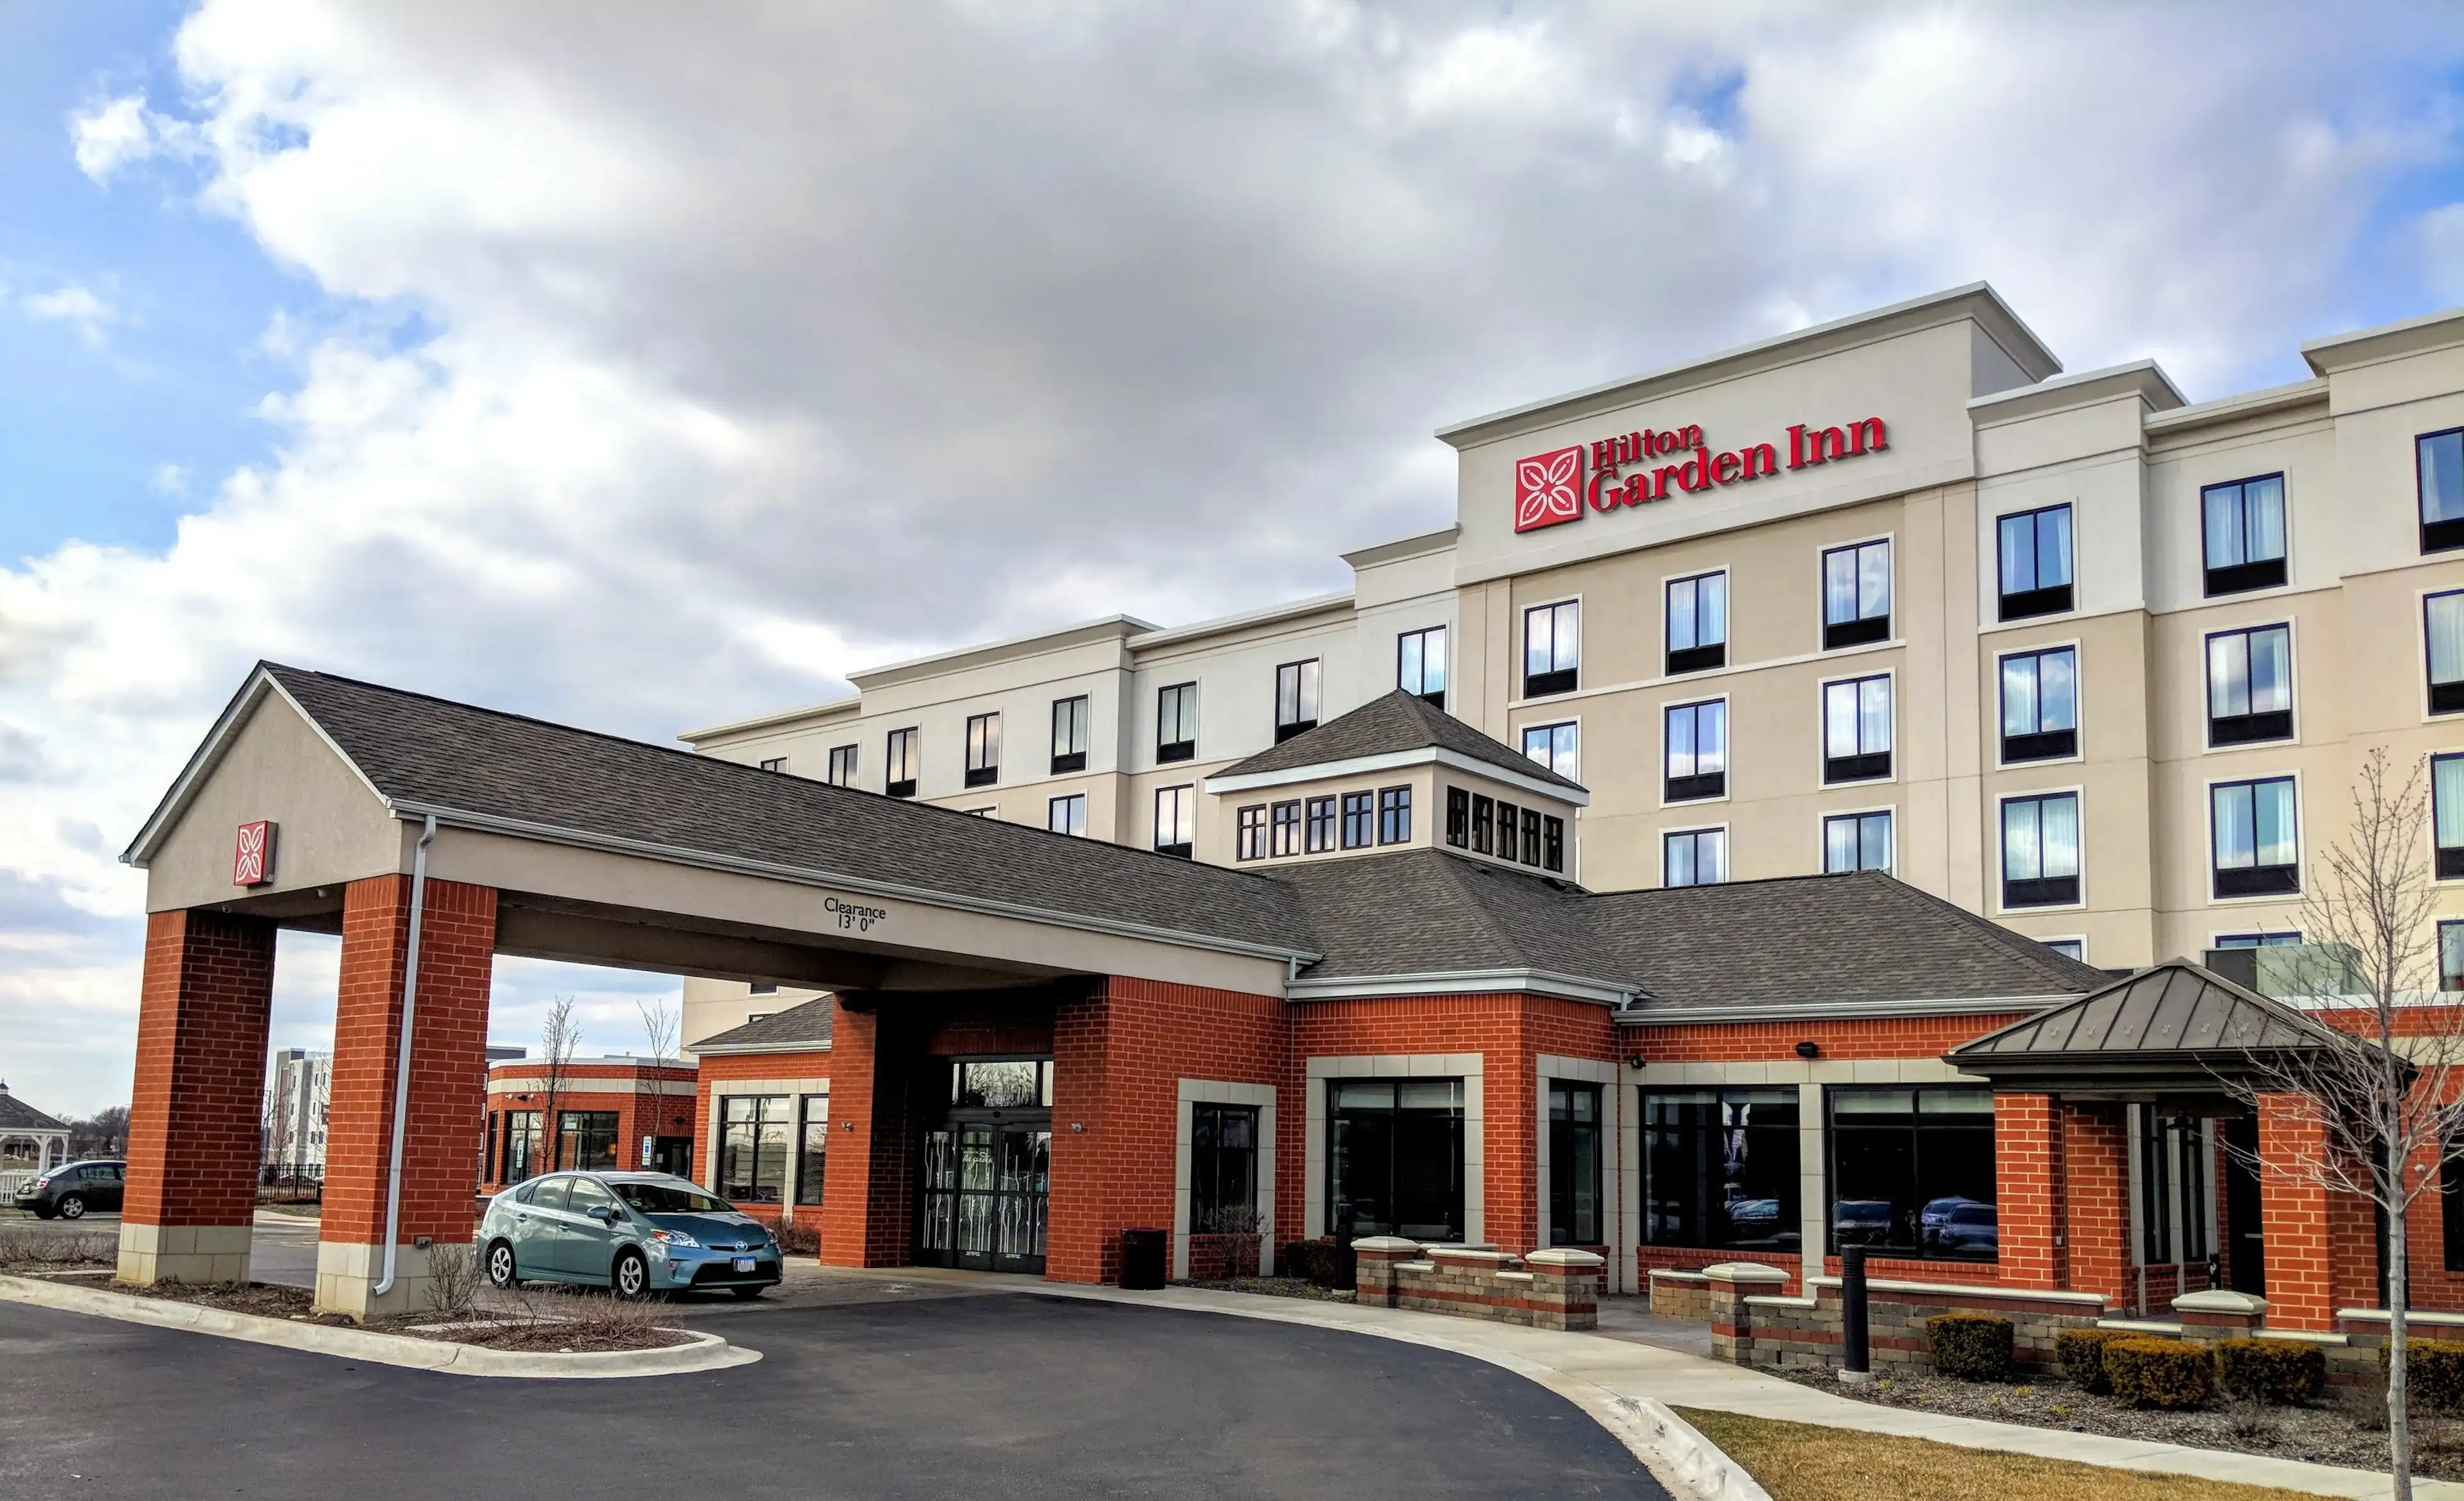 Best Bolingbrook hotels. Cheap hotels in Bolingbrook, Illinois, United States